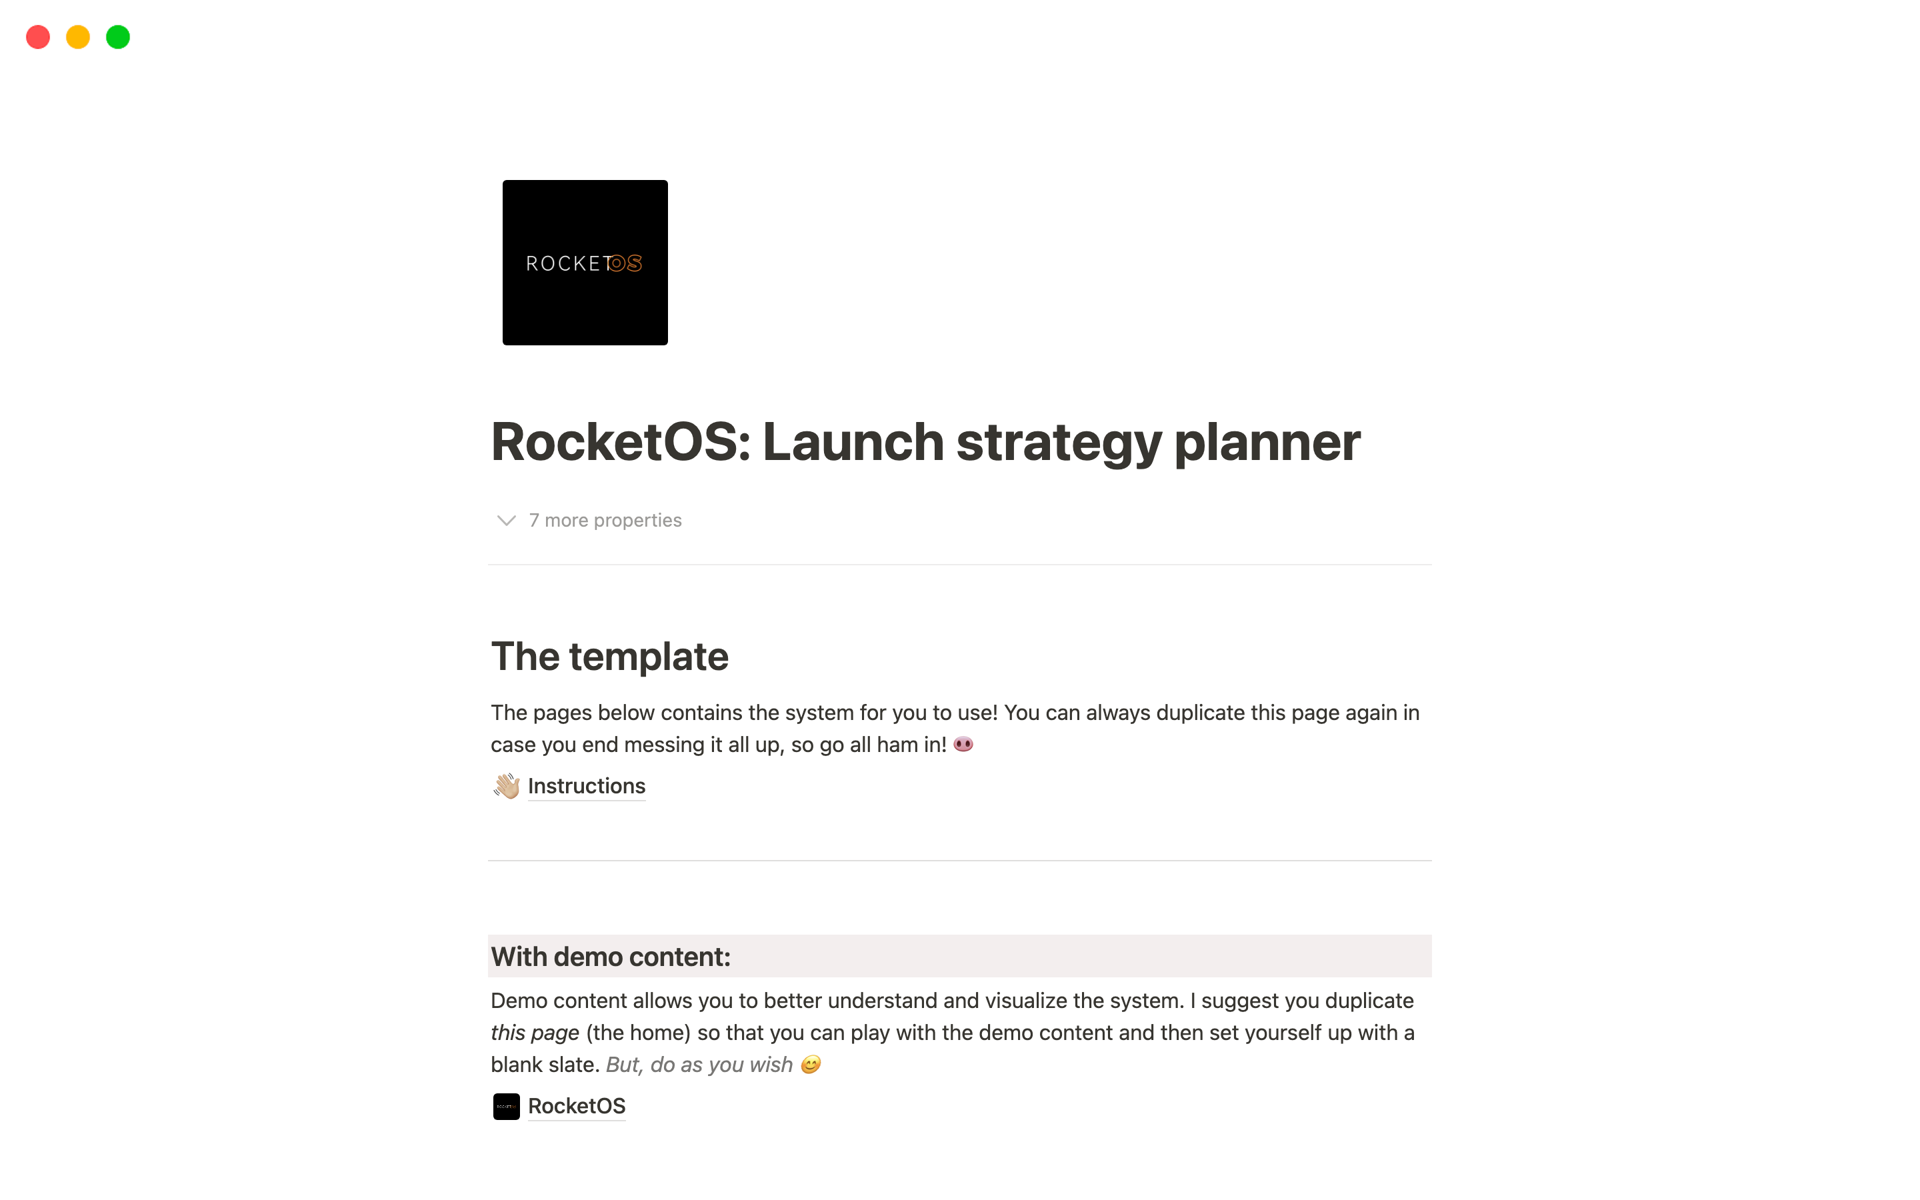 A full system for you to launch anything with RocketOS.